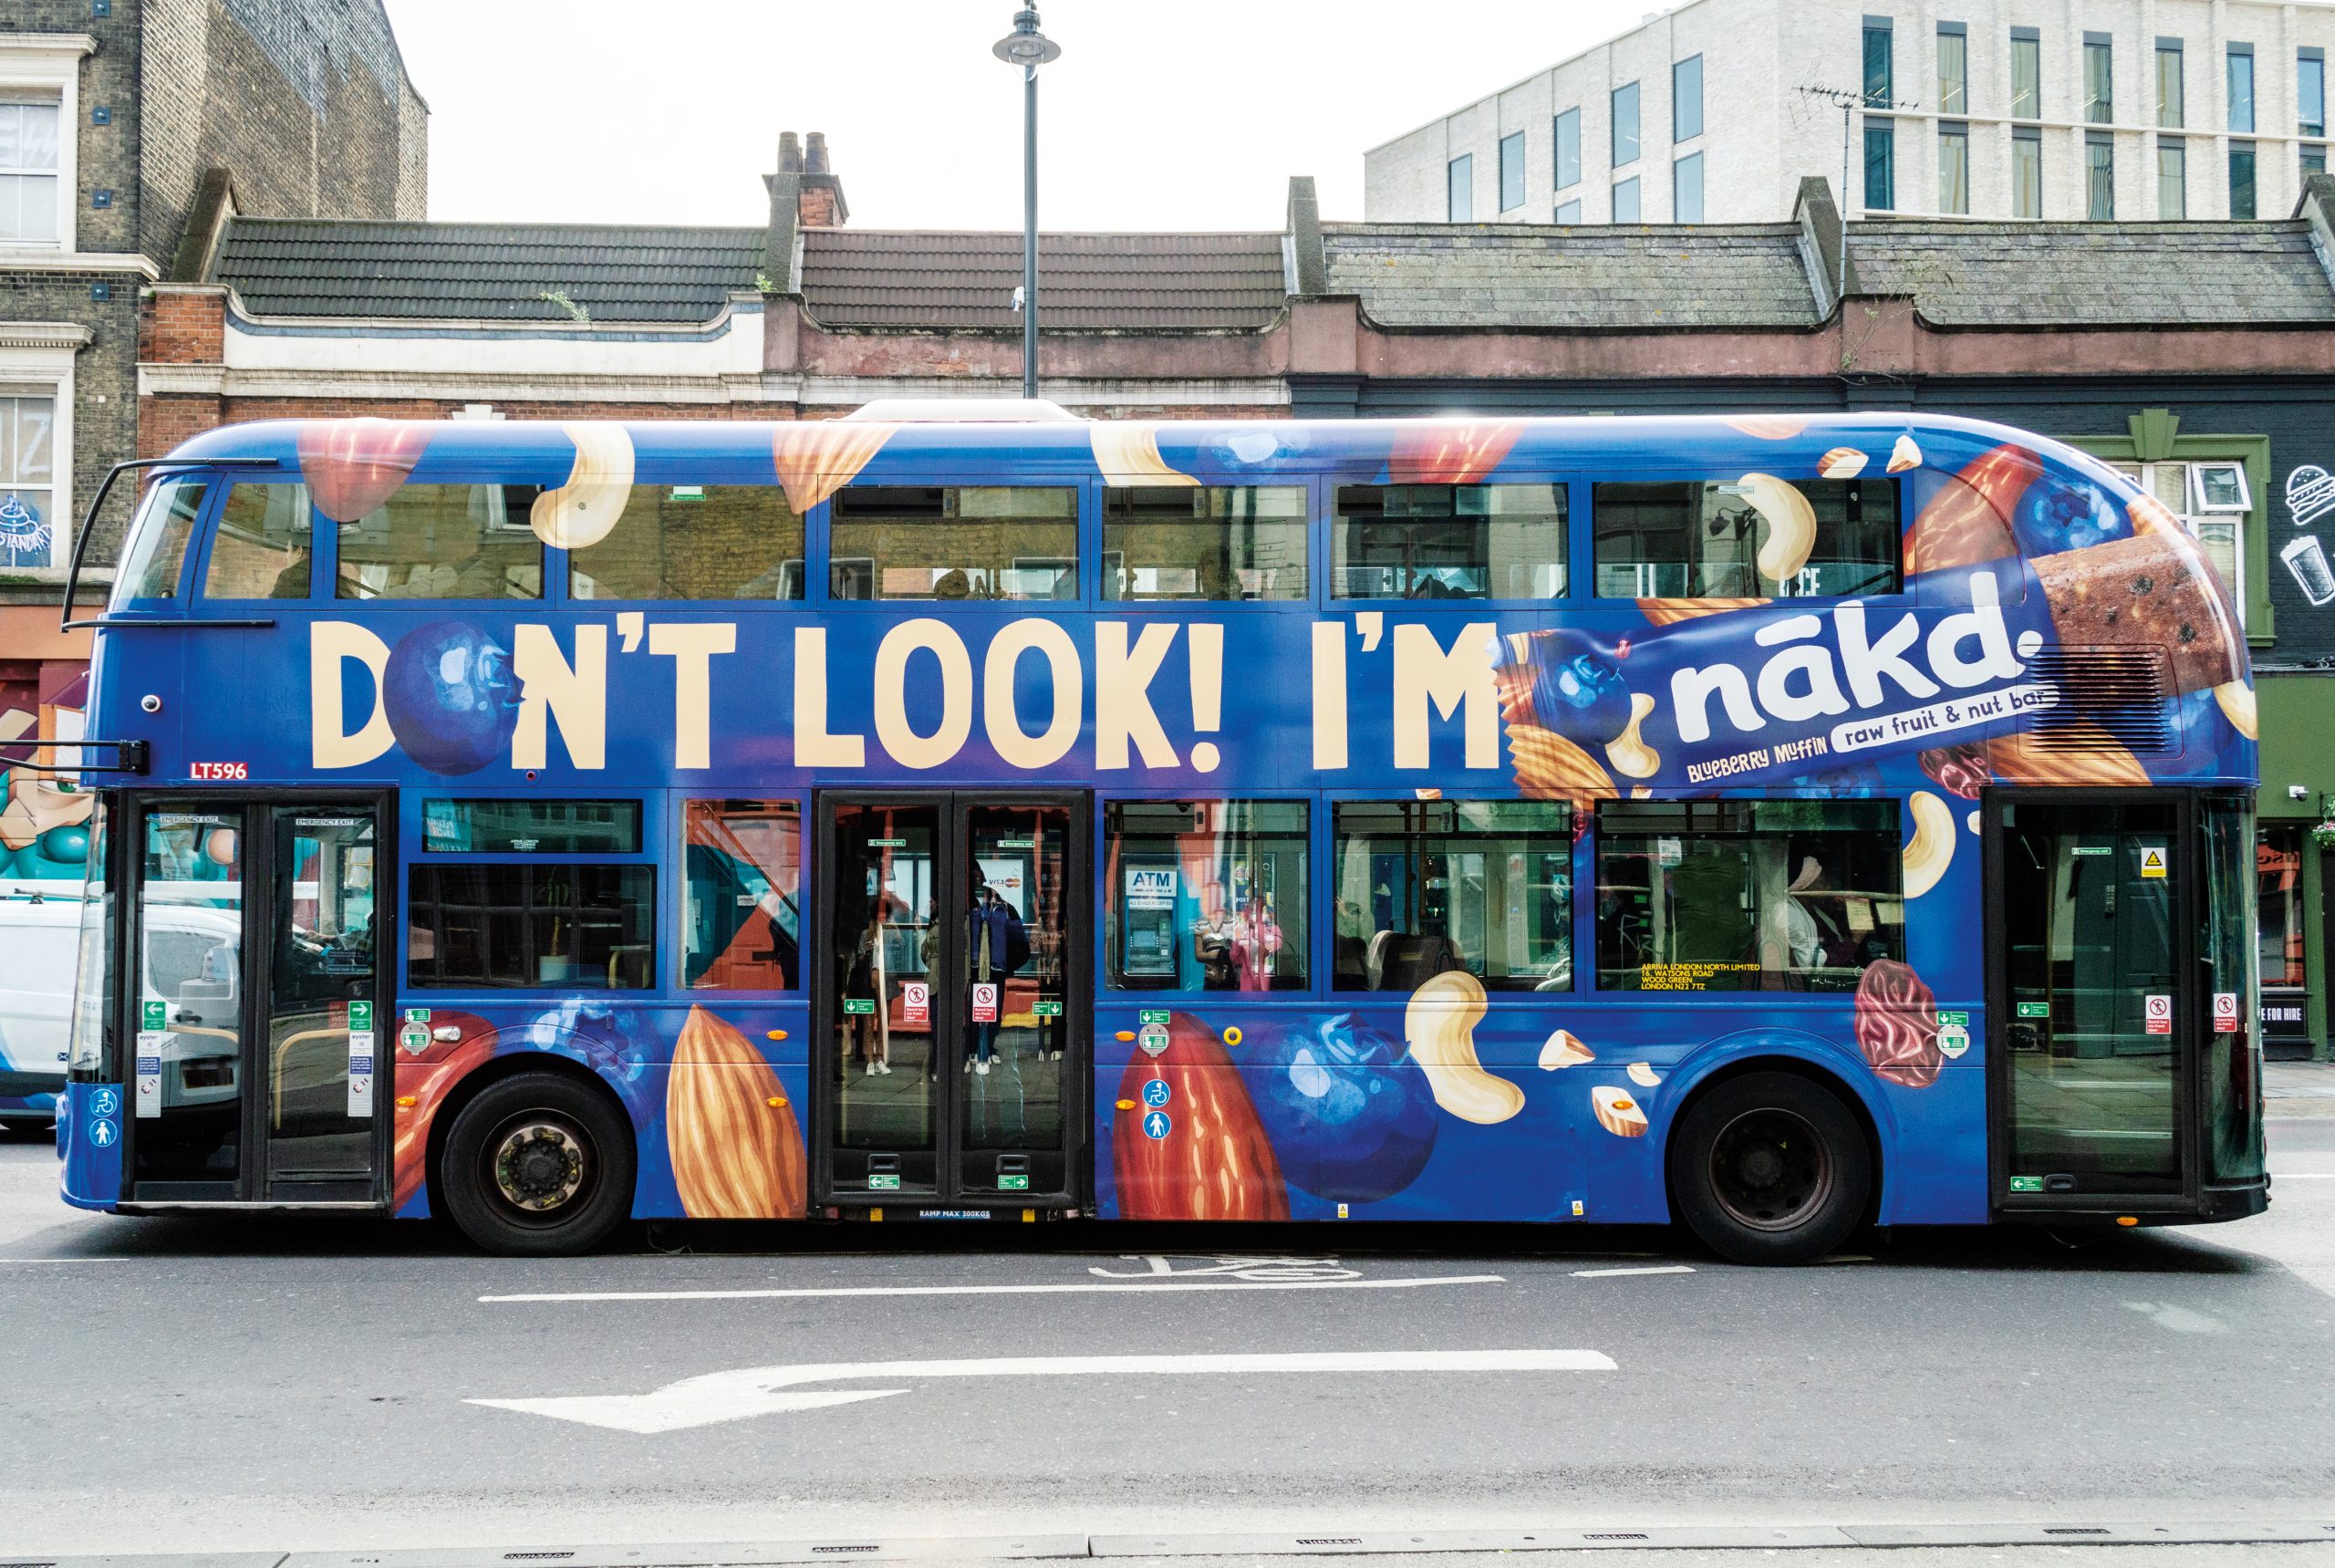 nākd. set to attract new shoppers through redesign, national campaign